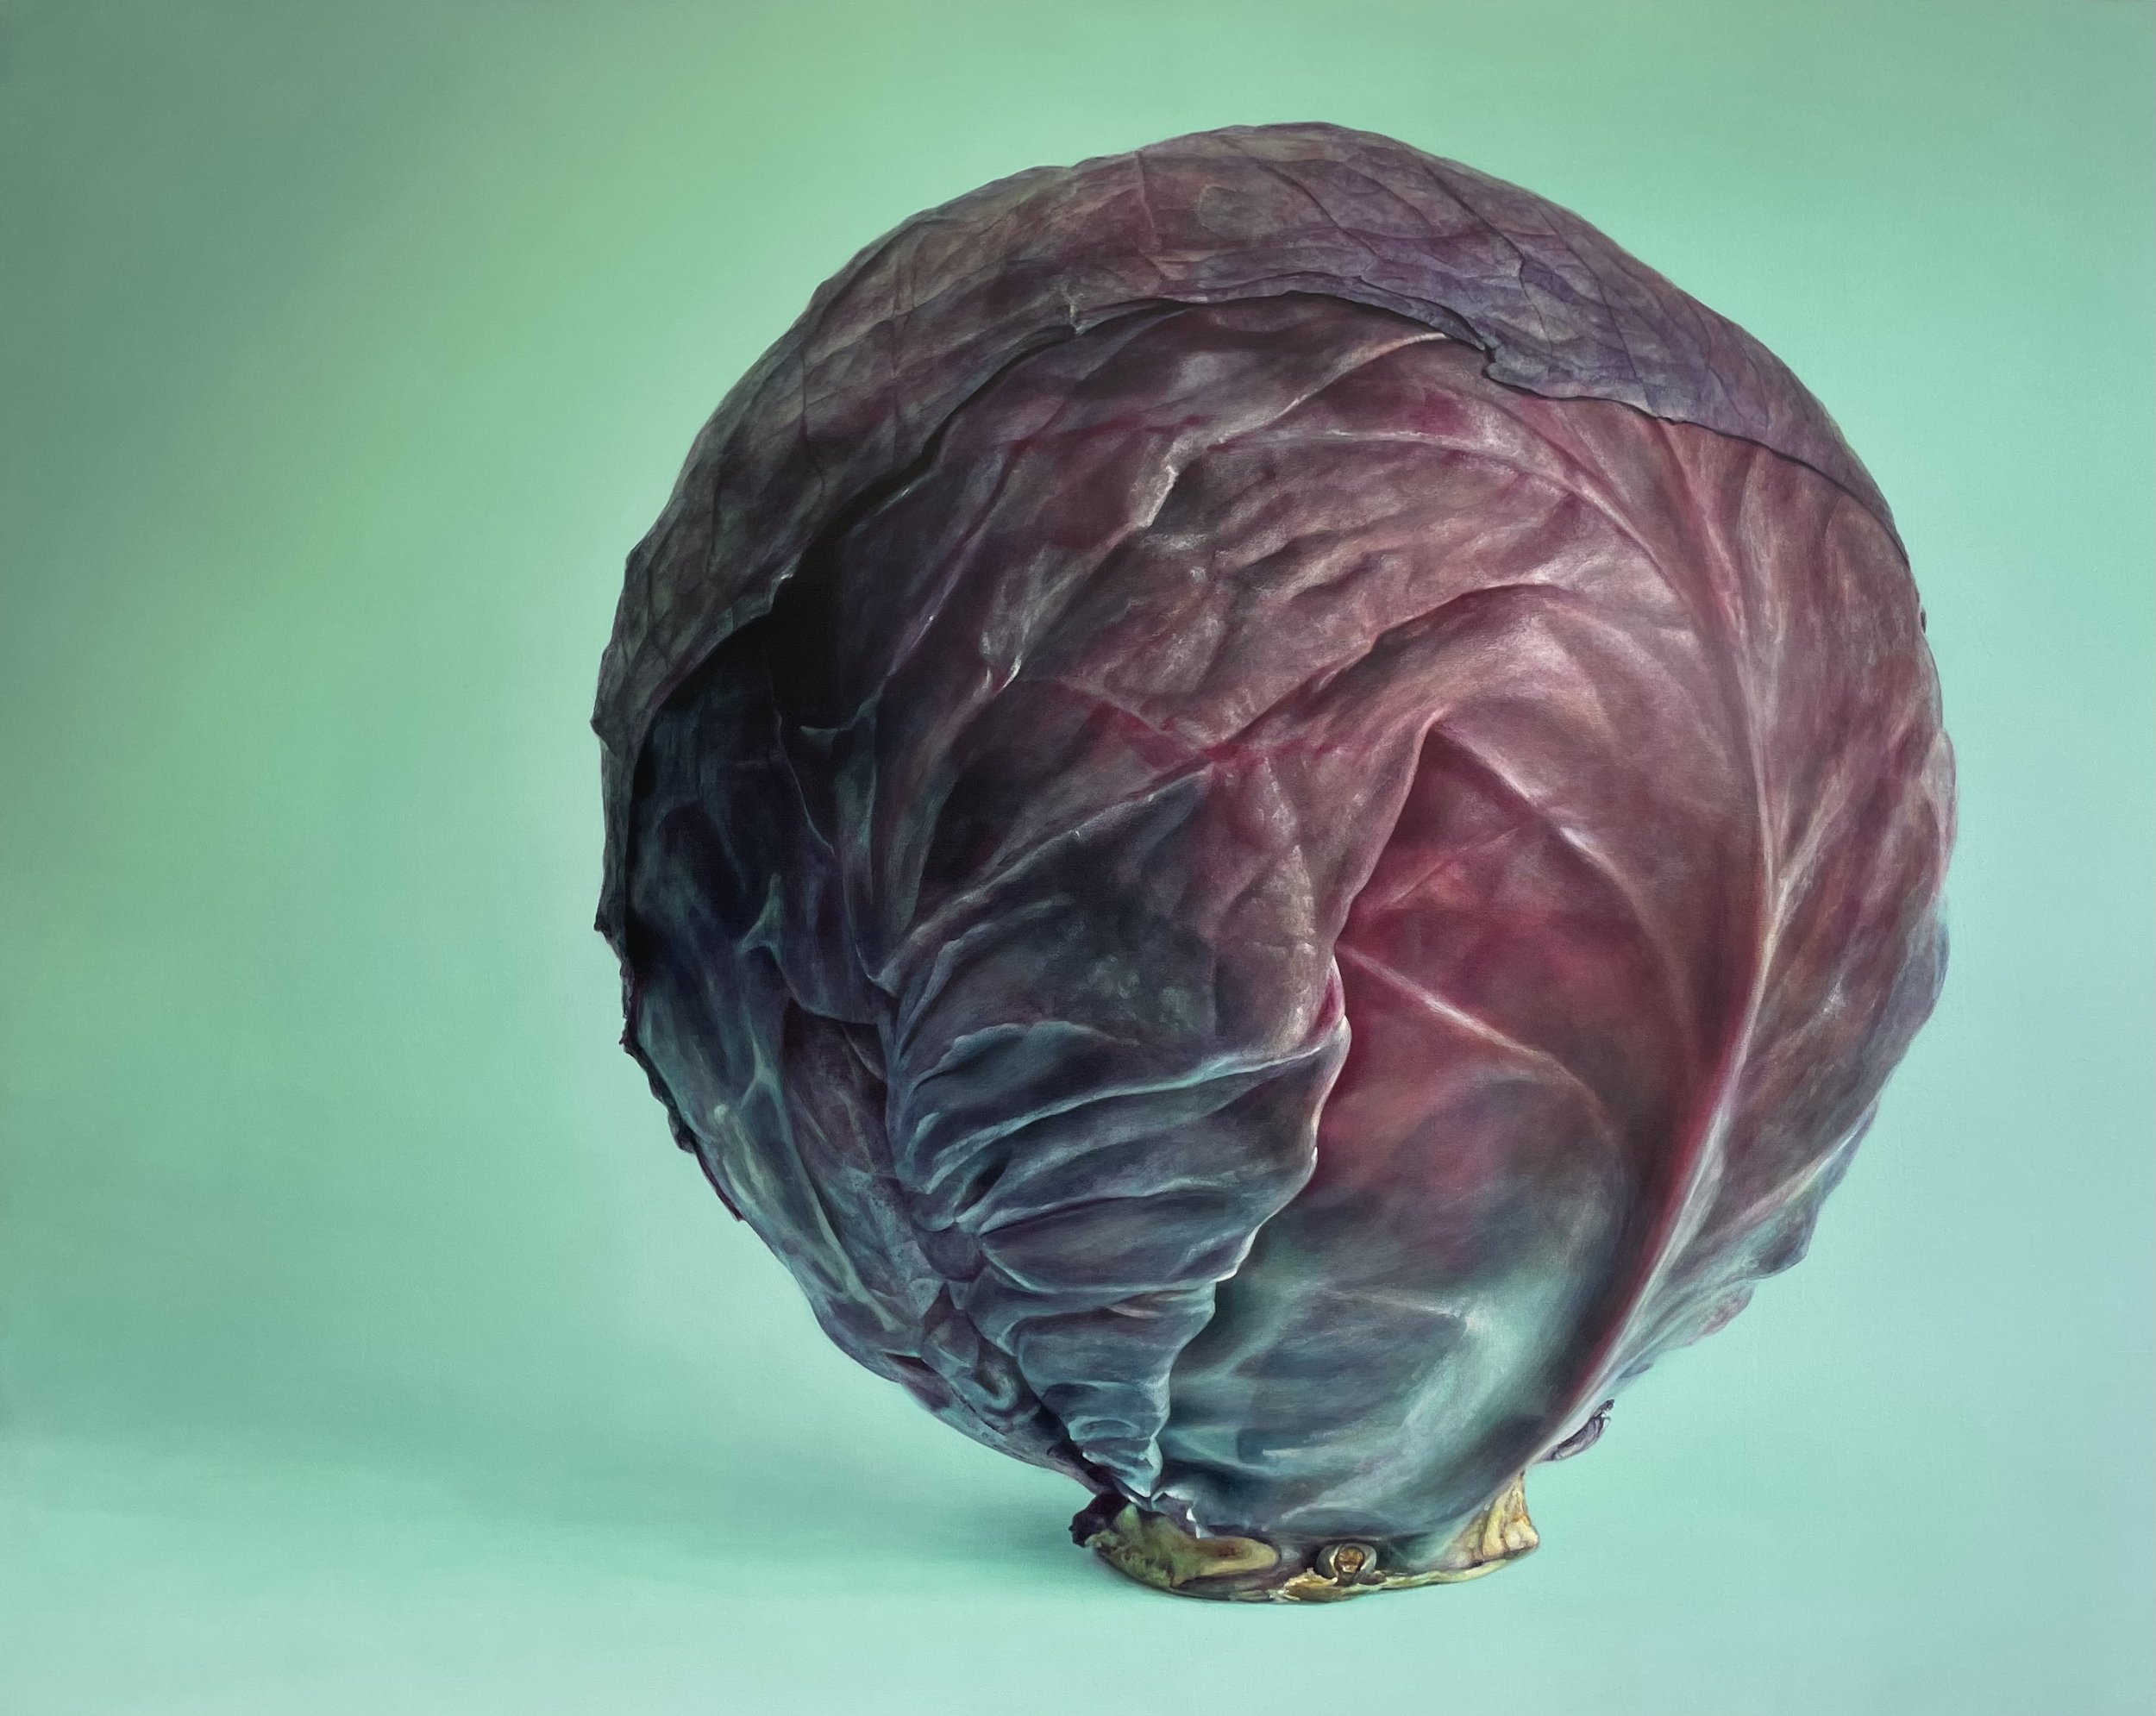 Red Cabbage on Seafoam Green